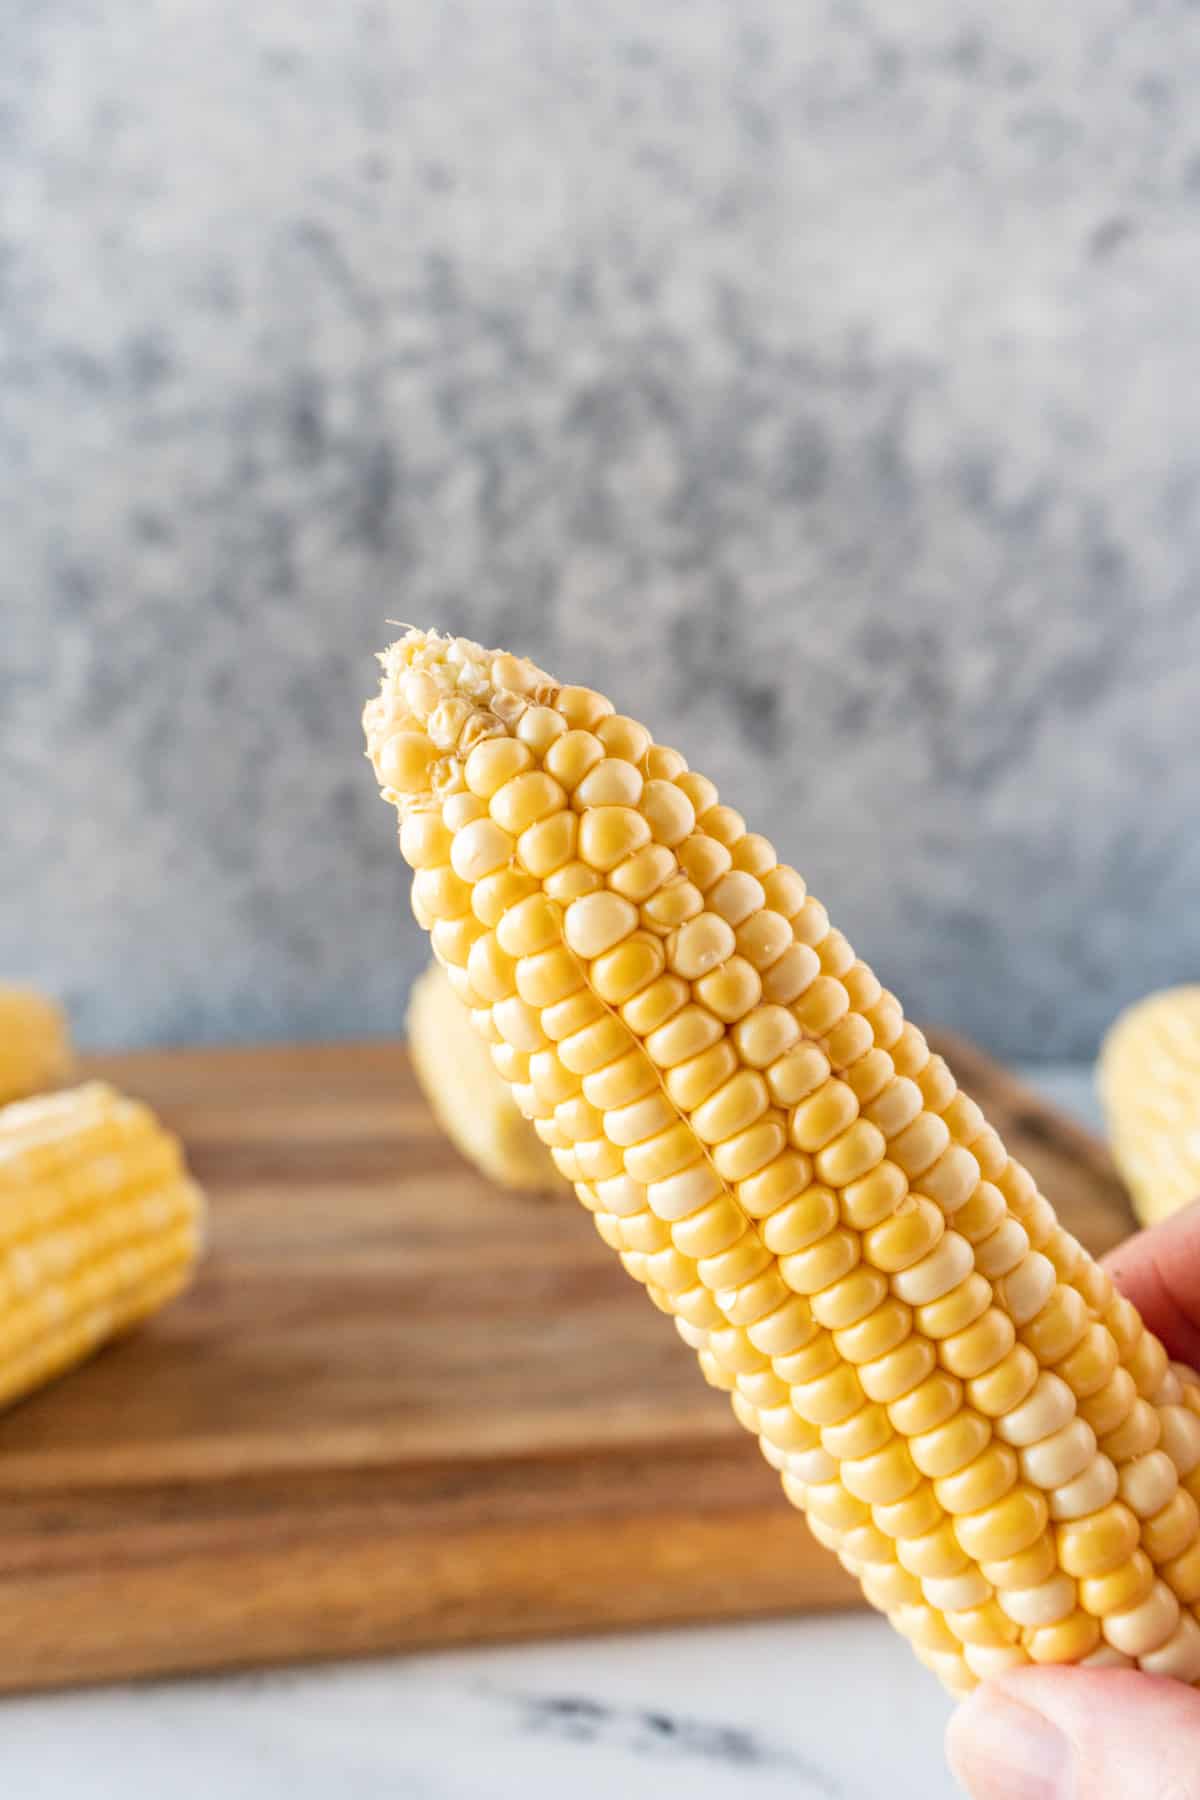 corn on the cob showing top where kernels are missing